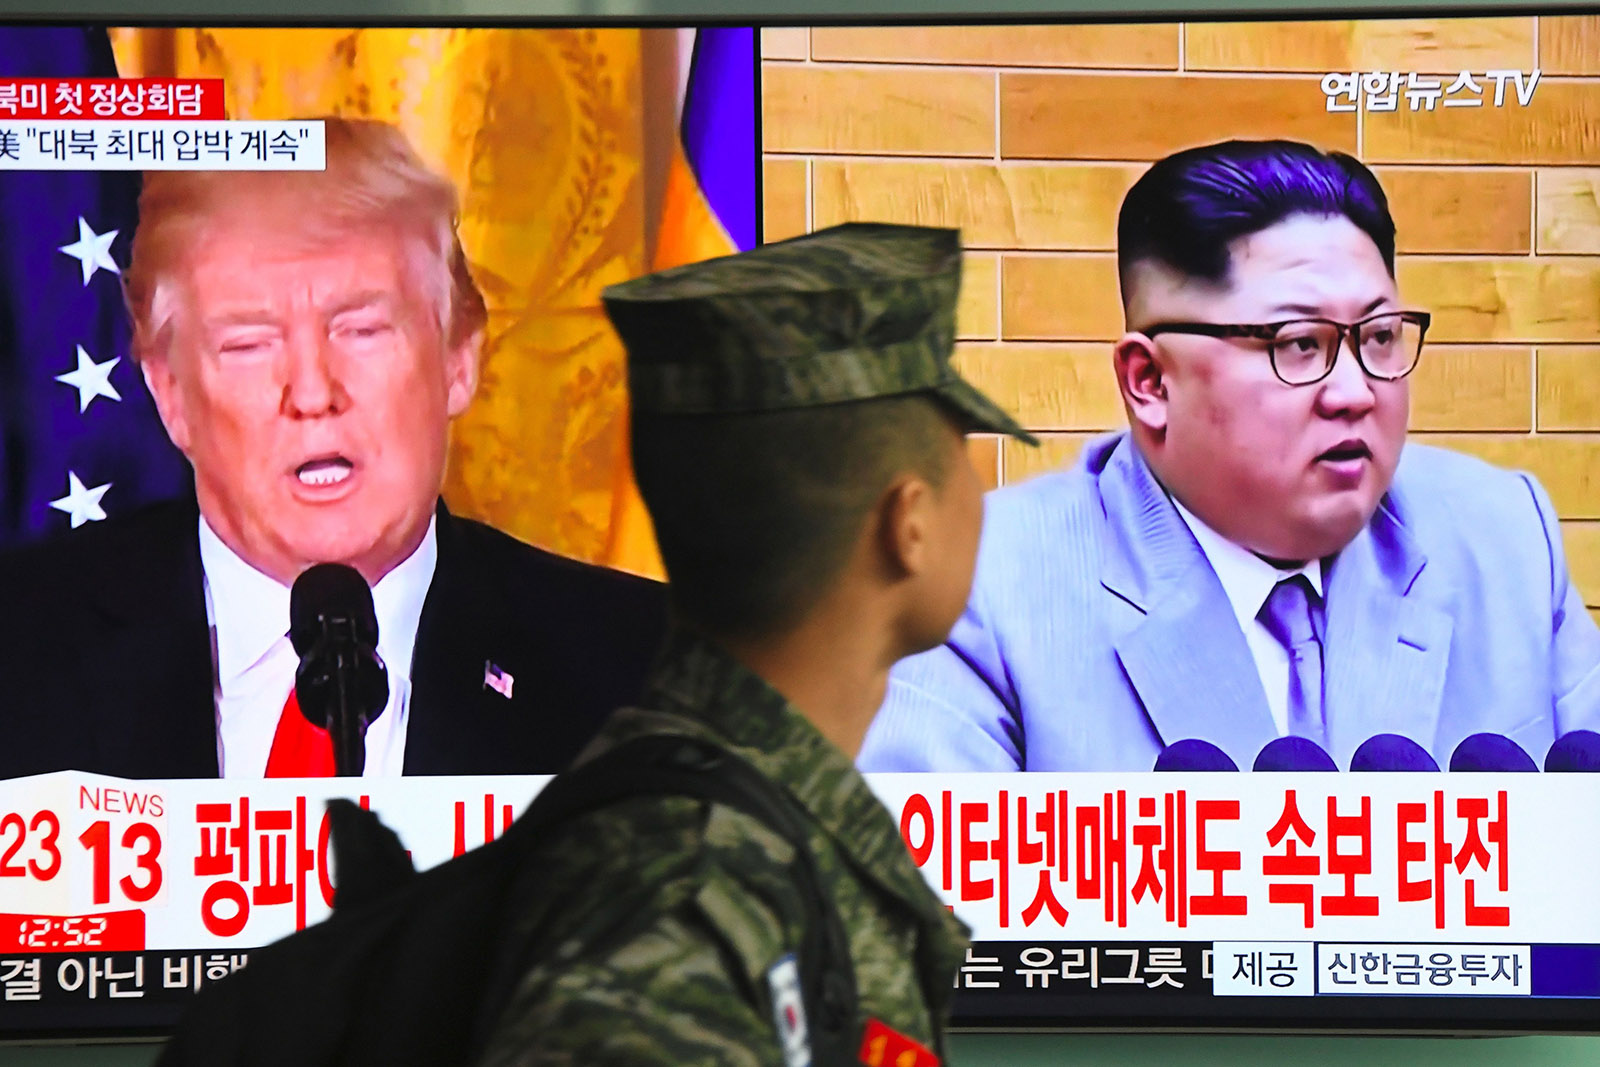 A South Korean soldier passing giant TV screen images of US President Donald Trump and North Korean leader Kim Jong-un in Seoul, South Korea, on March 9, 2018